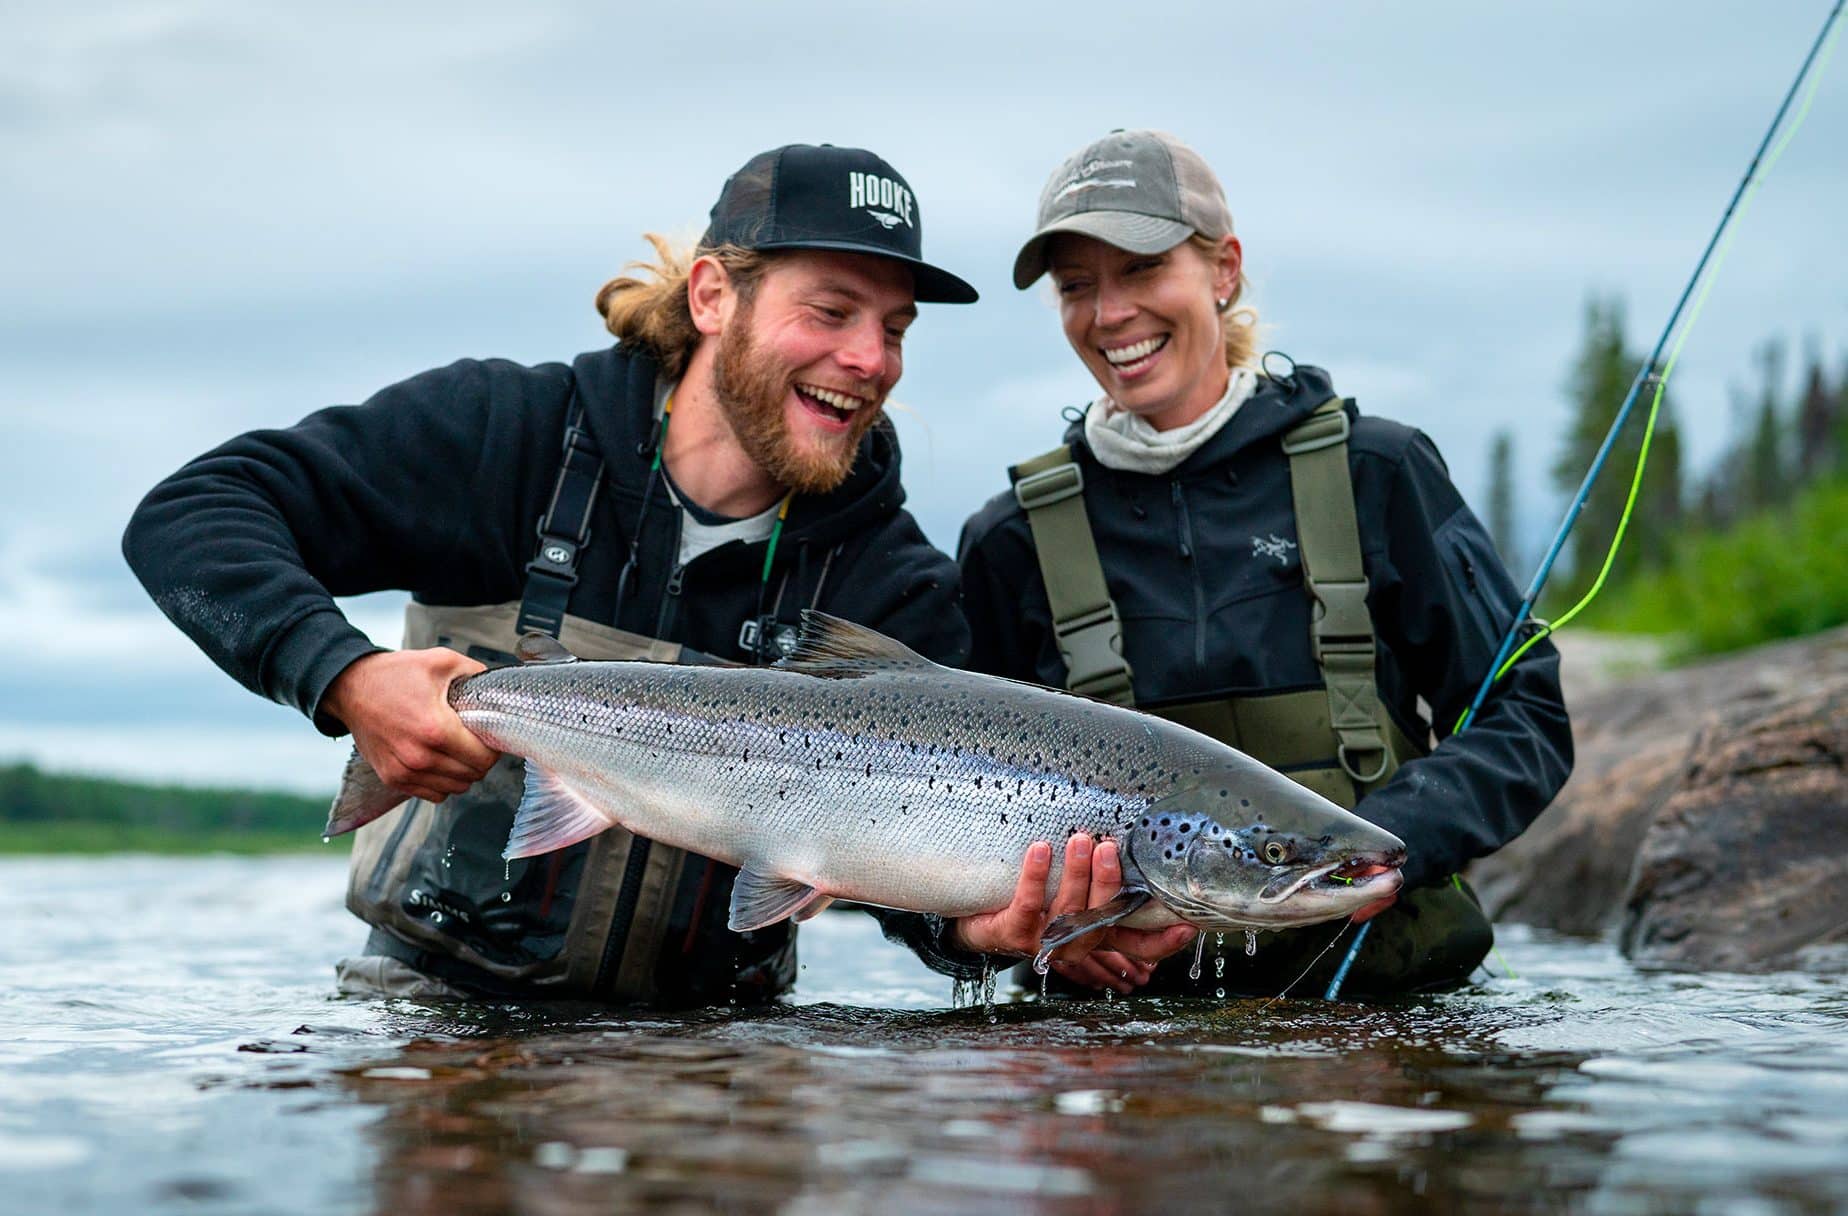 Fly fishing, aerial safari packages - Quebec - Wedge Hills Lodge